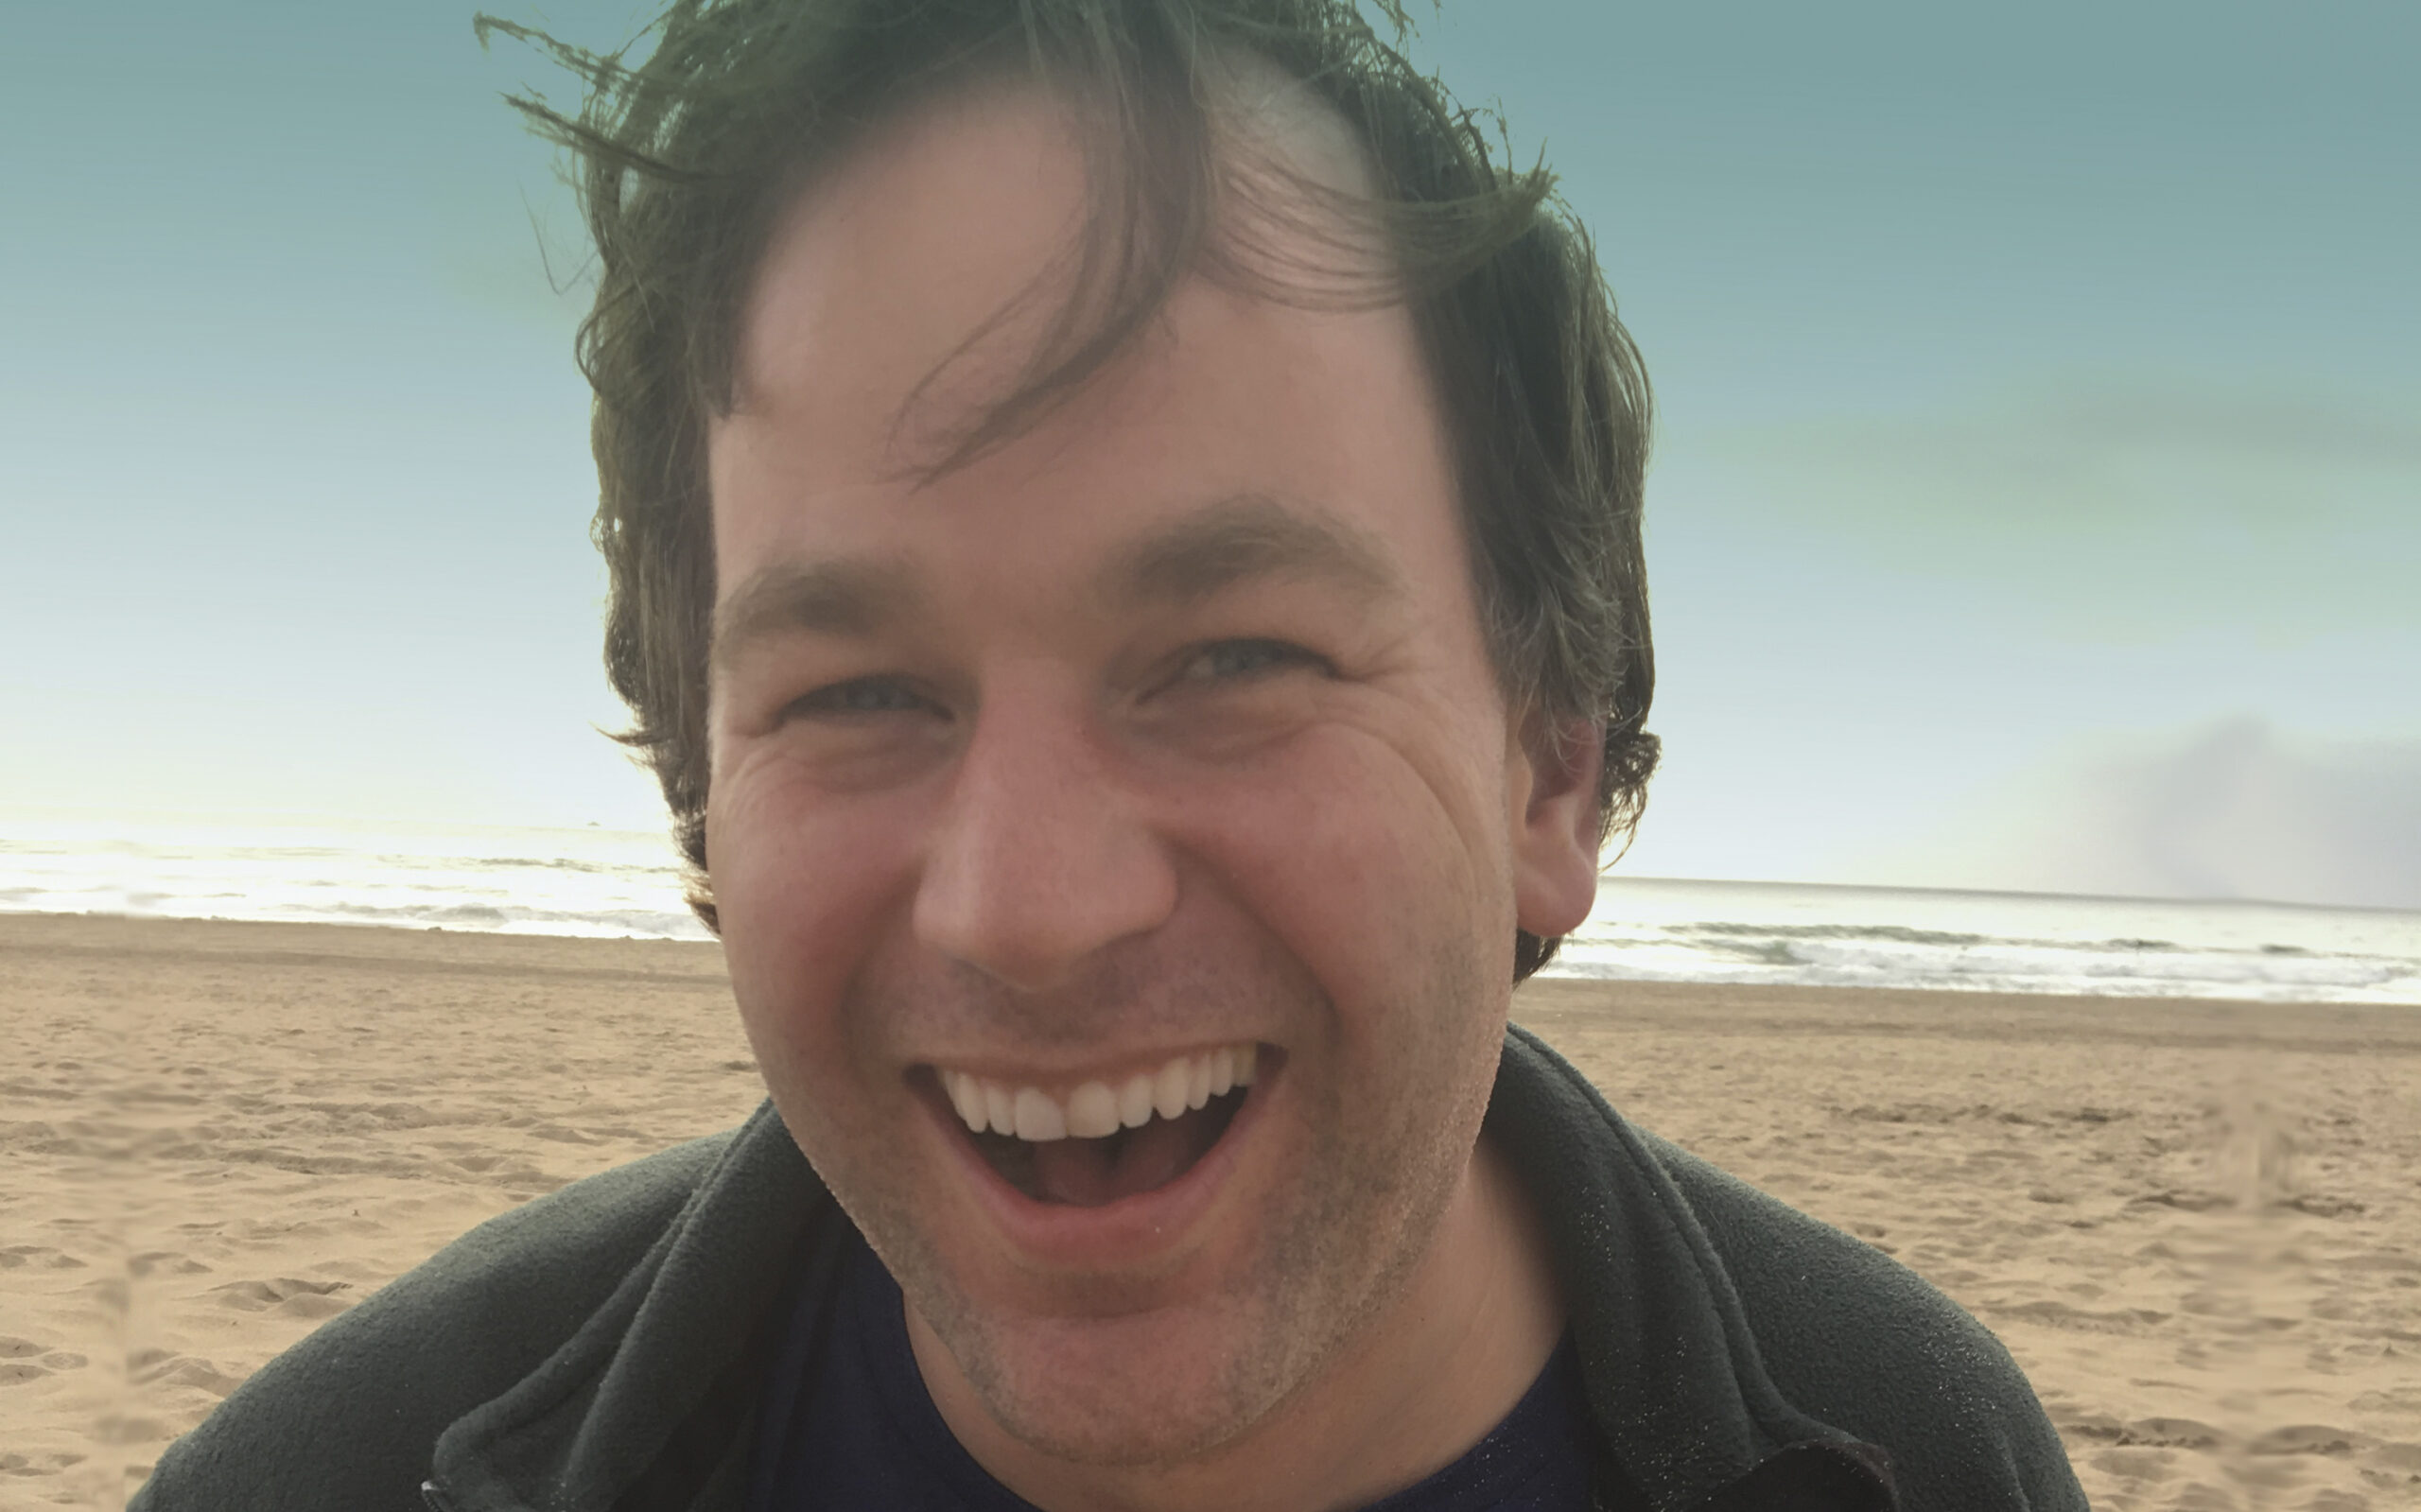 Mike Birbiglia at the beach laughing.